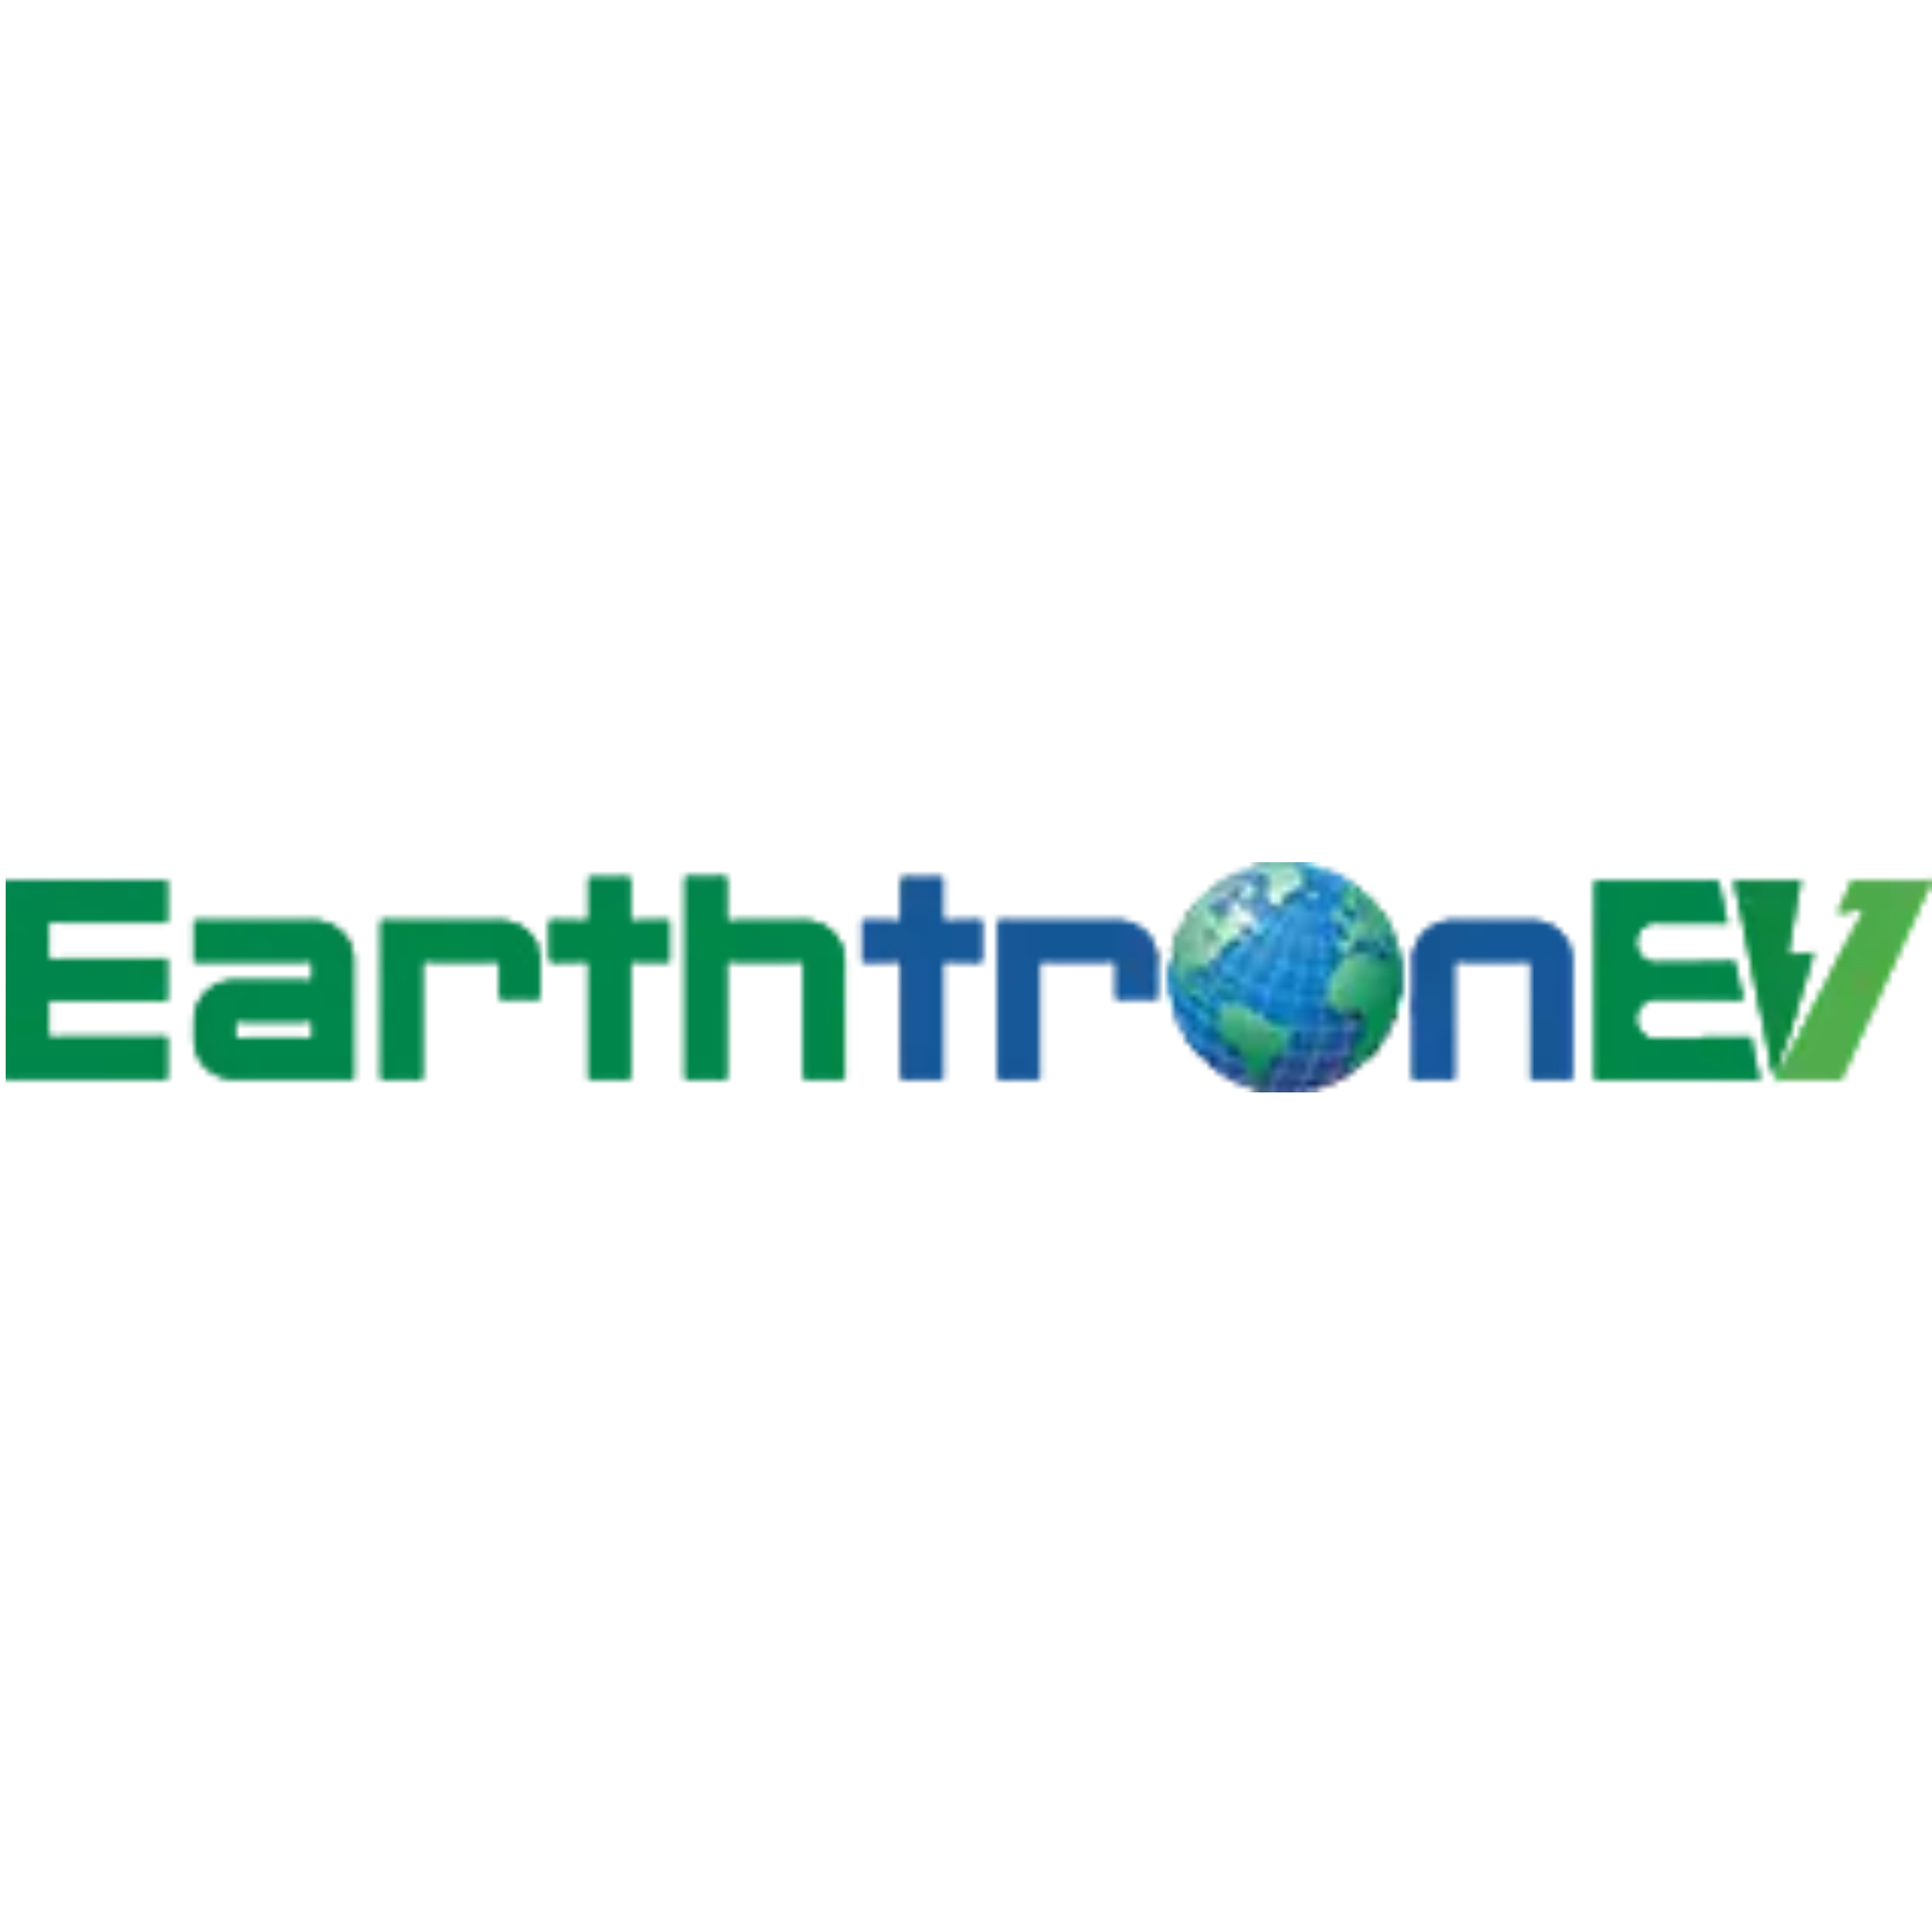 Earthtron EV launches EV charging stations in Delhi-NCR highways to make inter-city travel easy and anxiety-free for EV owners-thumnail